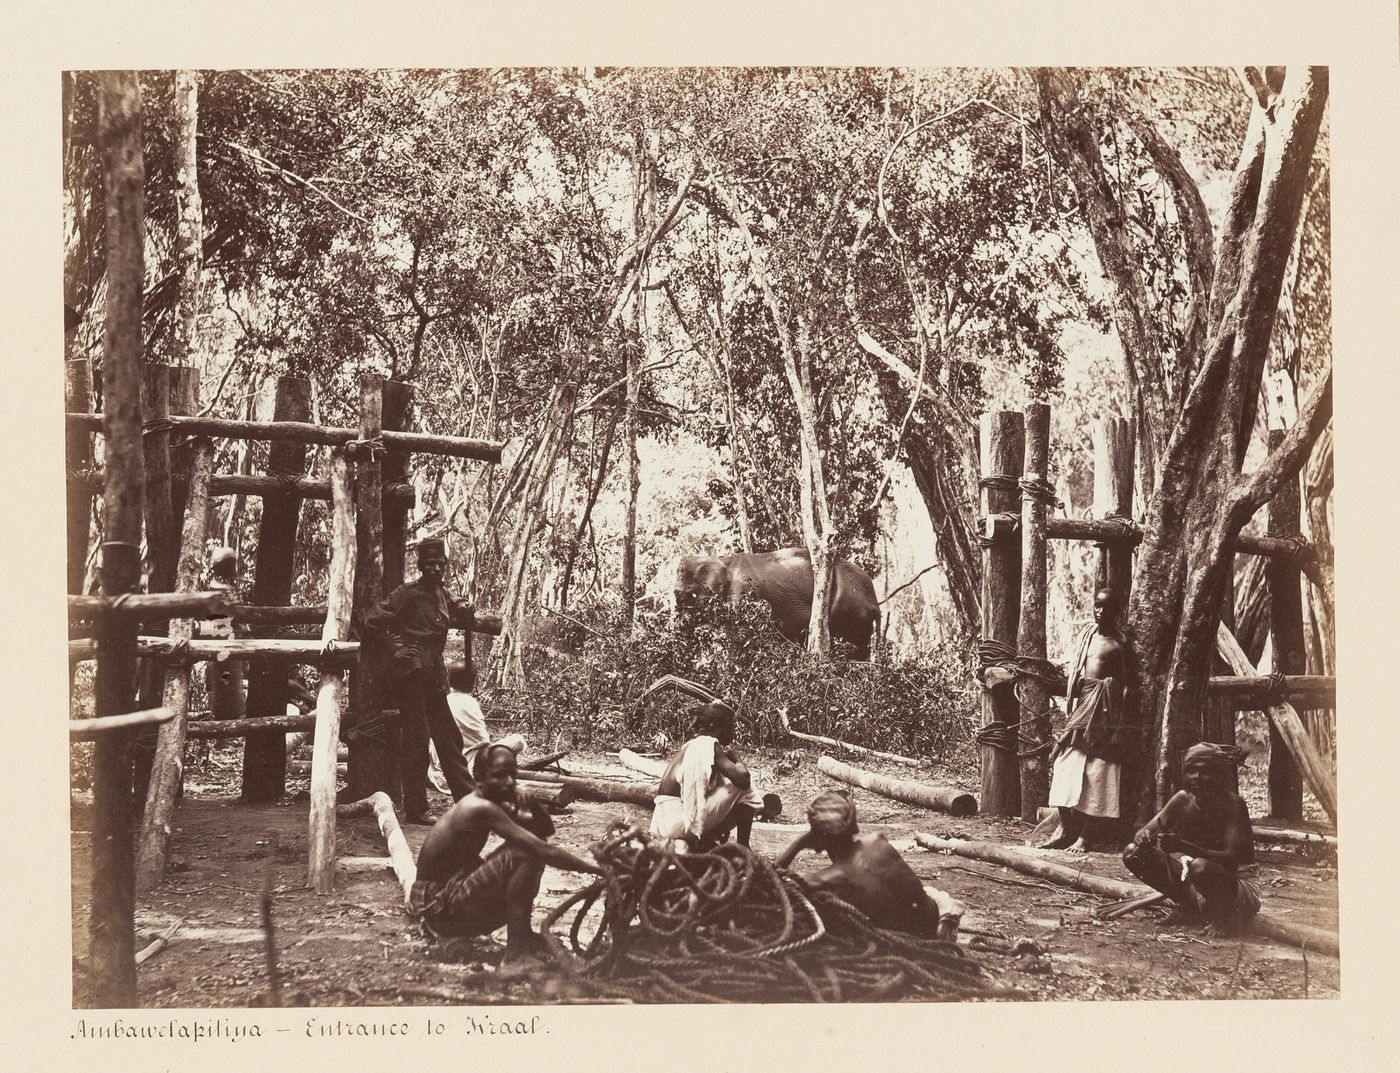 View of the entrance to the kraal with an elephant in the background and men in the foreground, Ambawela, Ceylon (now Sri Lanka)